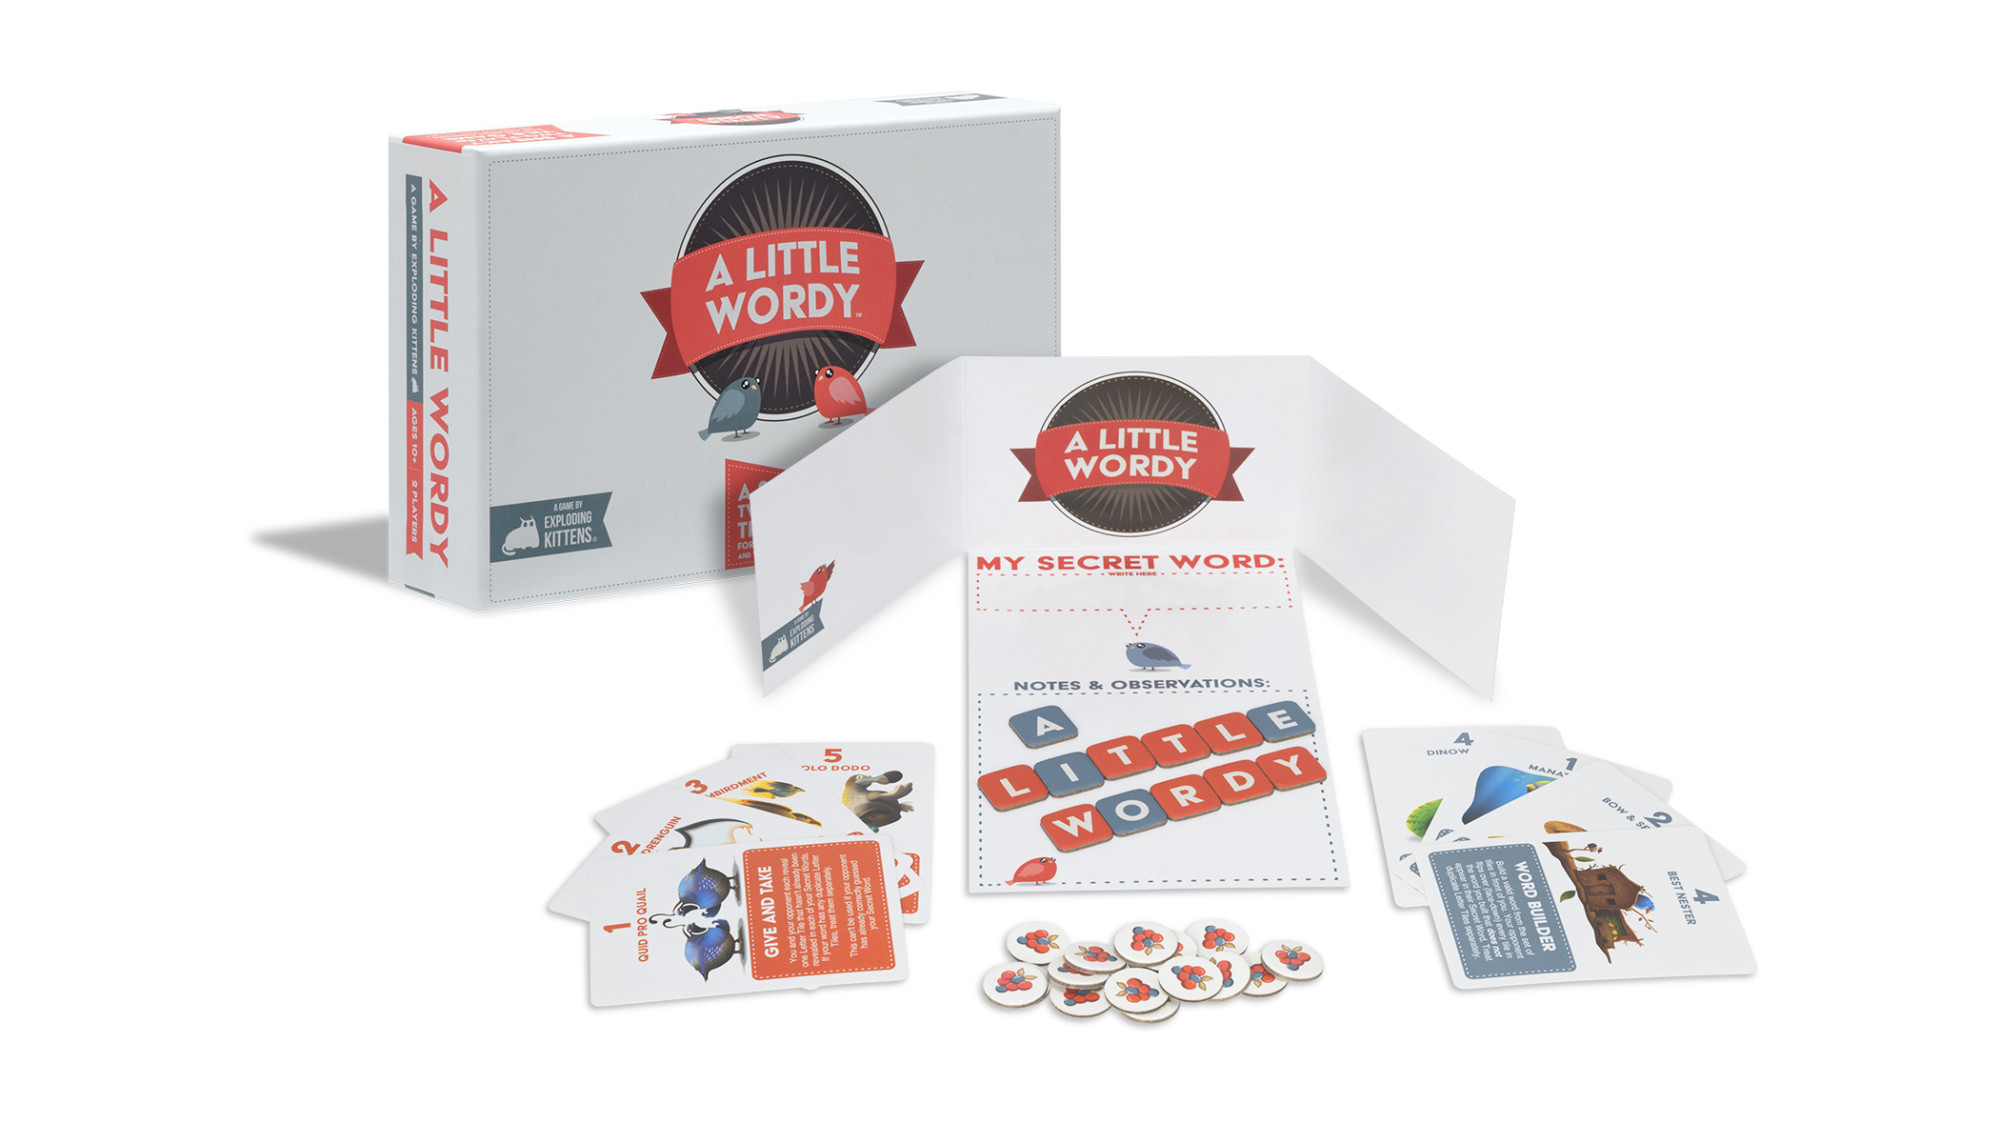 Exploding Kittens: 2 Player Edition, Board Games